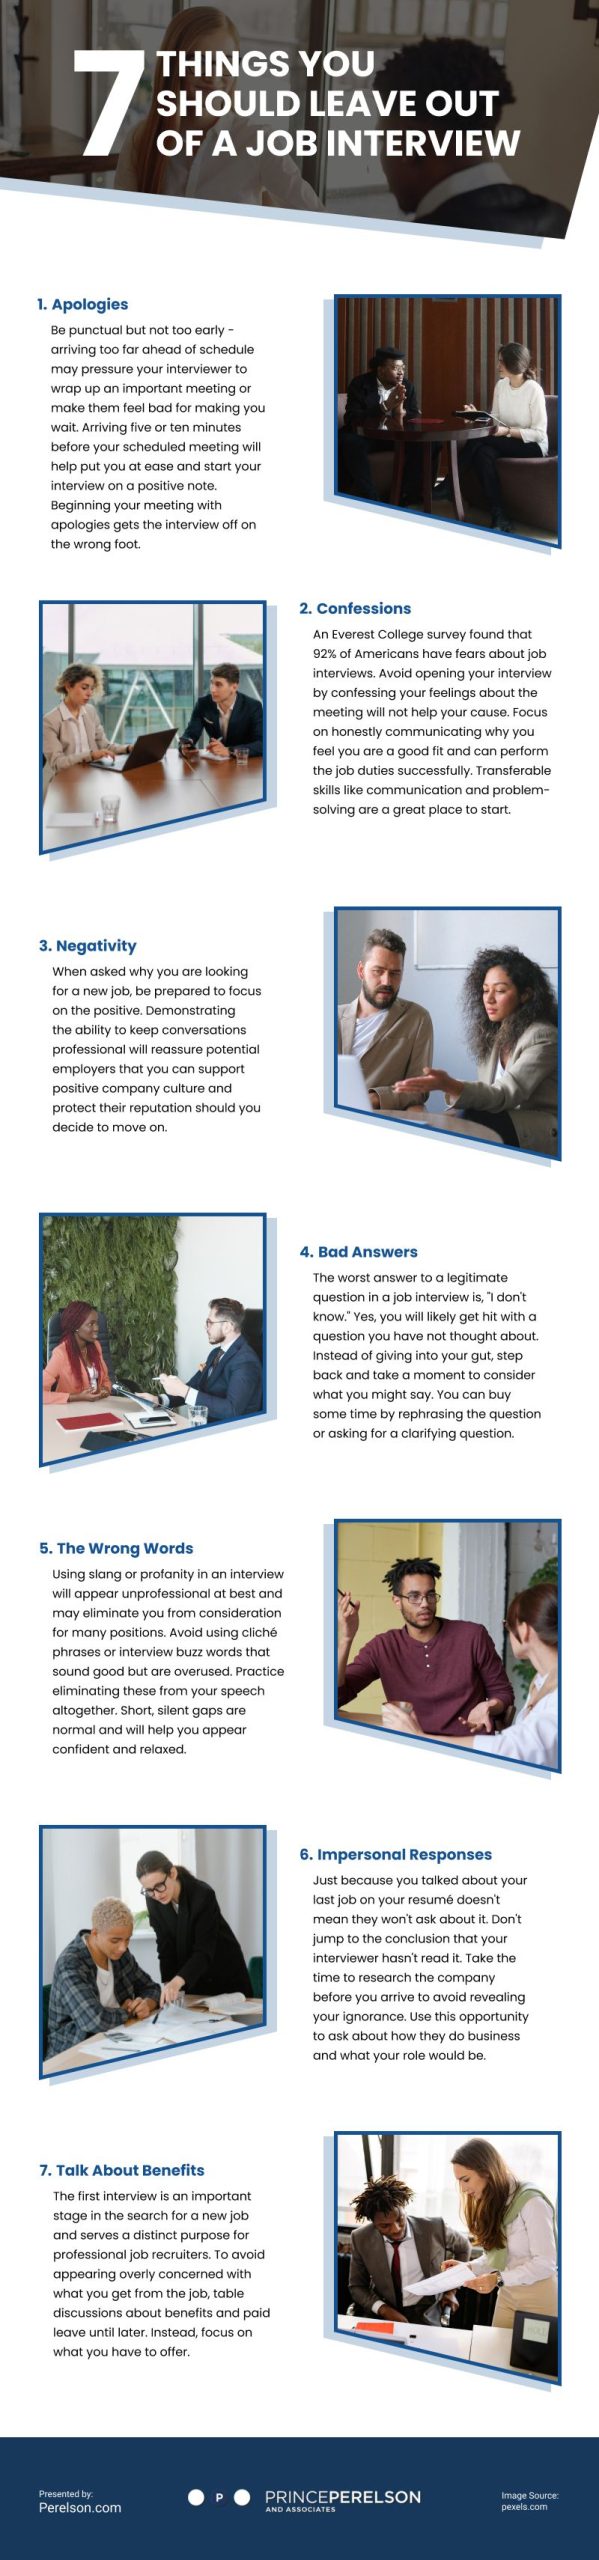 7 Things You Should Leave Out of a Job Interview Infographic